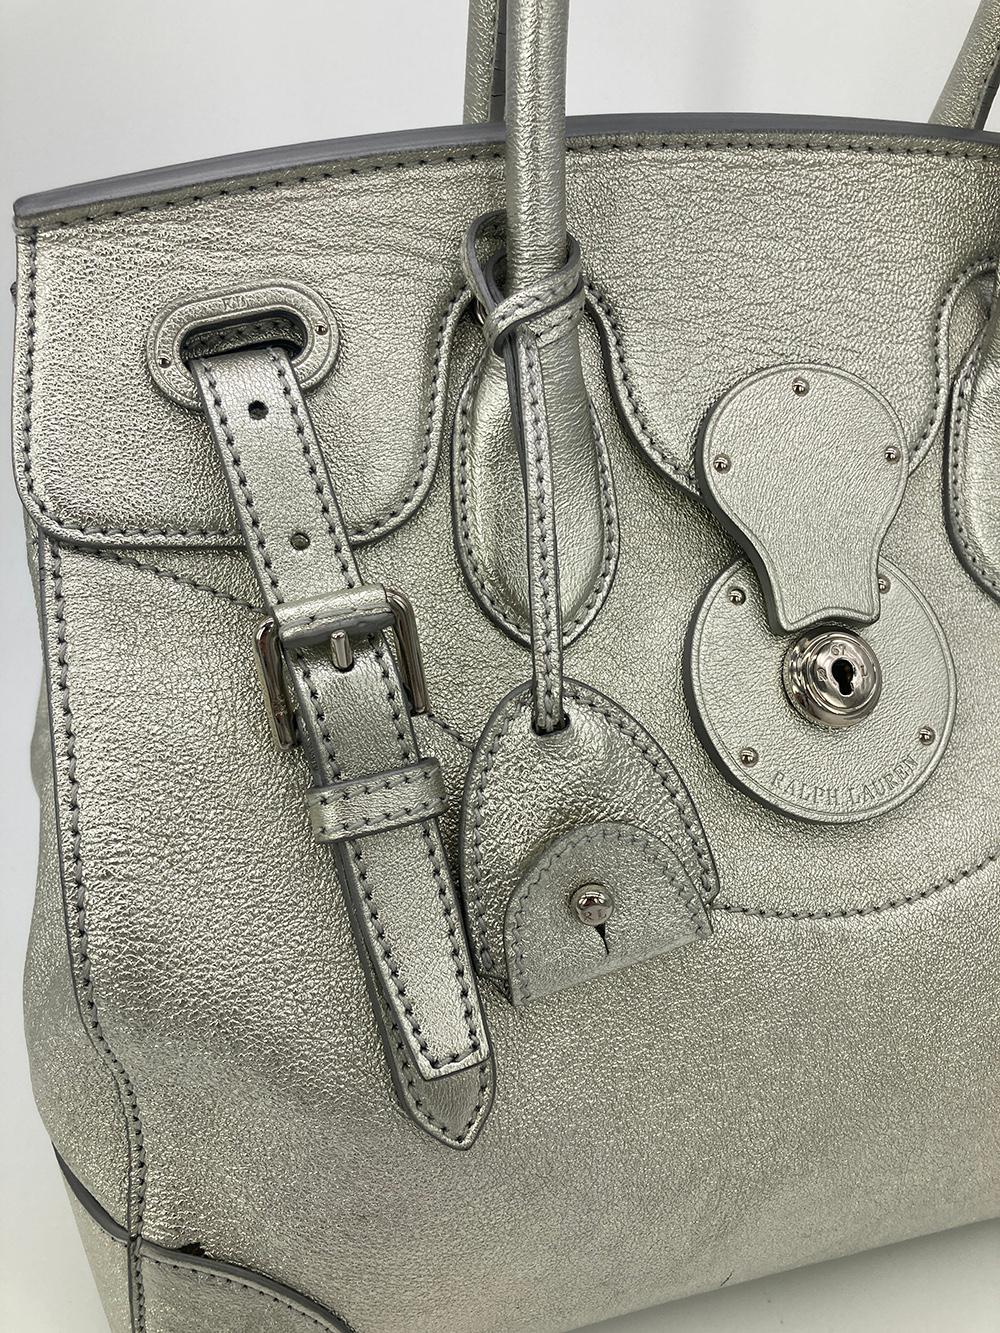 Ralph Lauren Silver Leather Rickey Bag For Sale 7